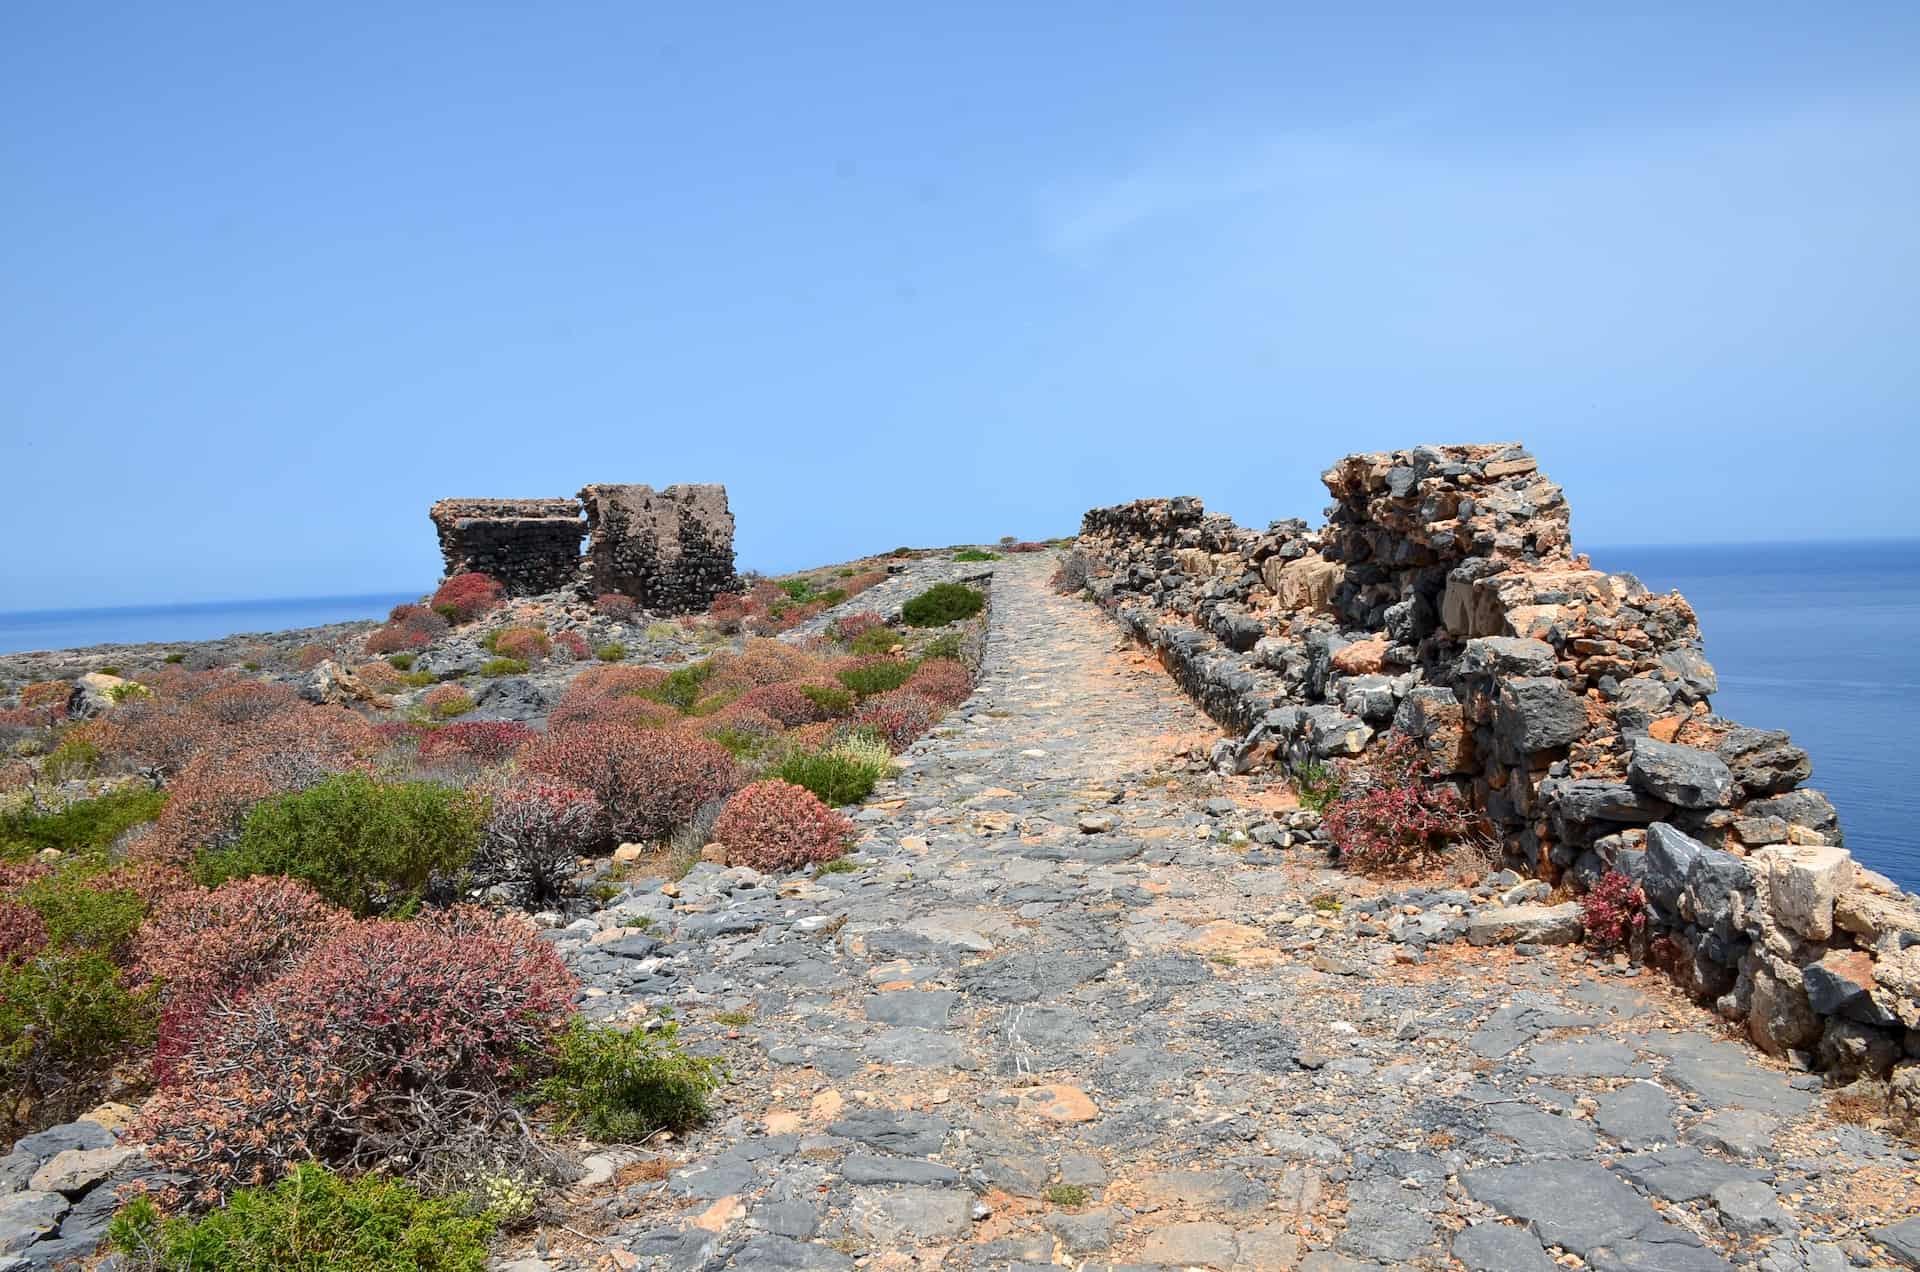 North end of the Venetian fortress on Gramvousa, Crete